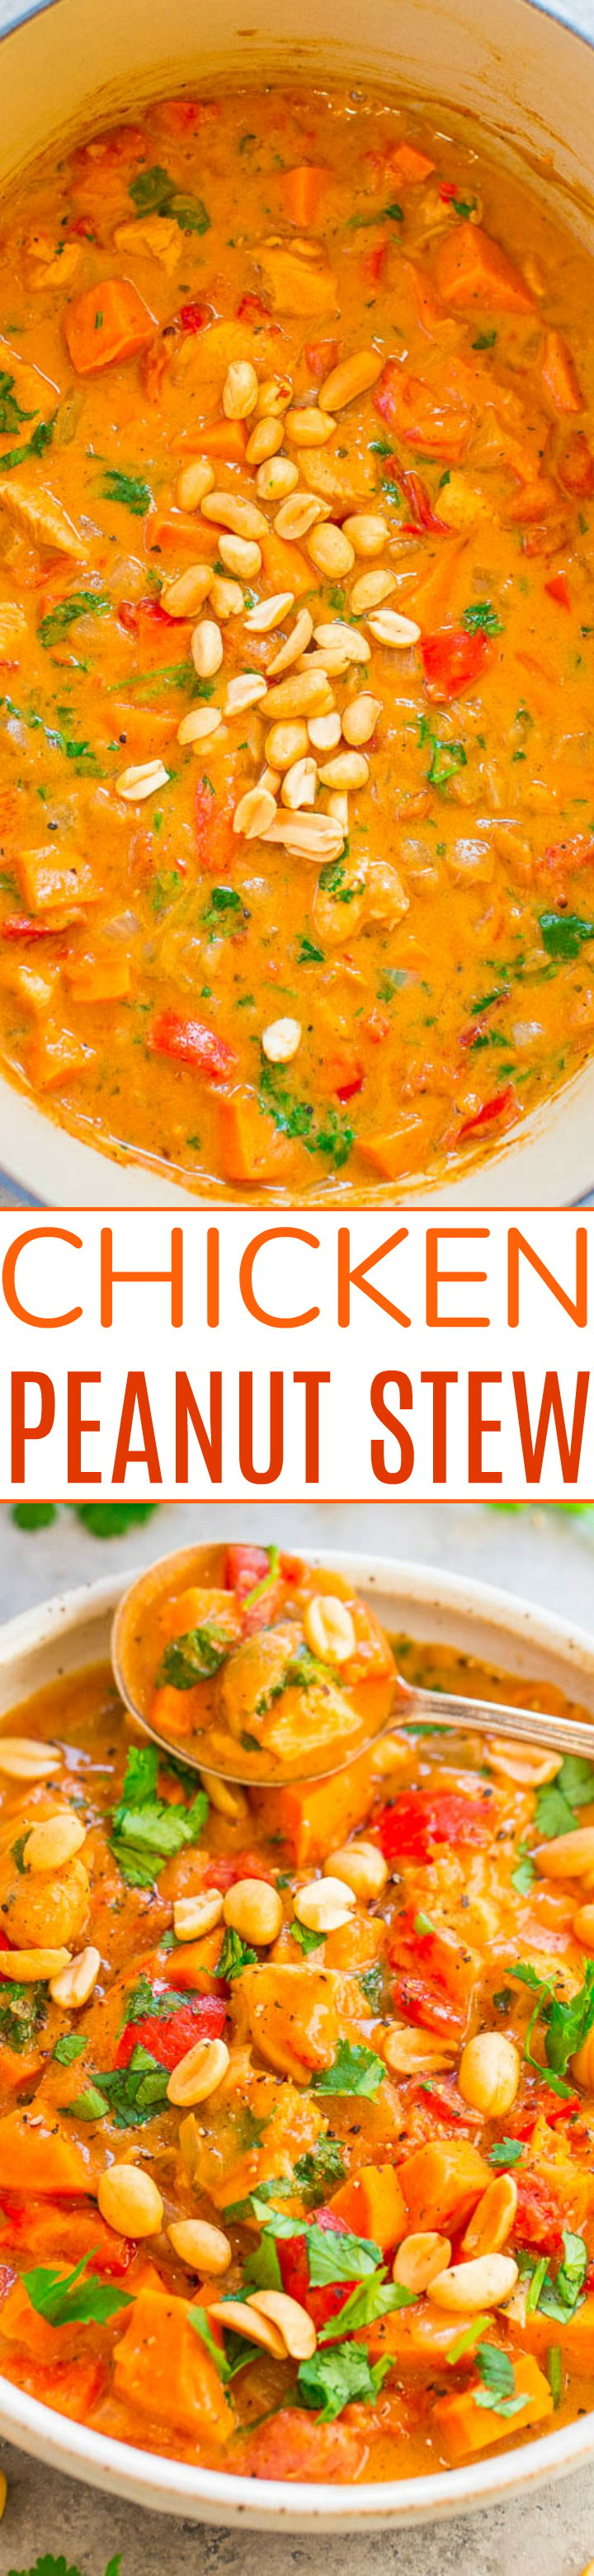 Chicken Peanut Stew - EASY, one pot, ready in about 30 minutes, and hearty comfort food at its finest!! So many layers of DELISH flavors and textures! Just the thing to warm you up!!